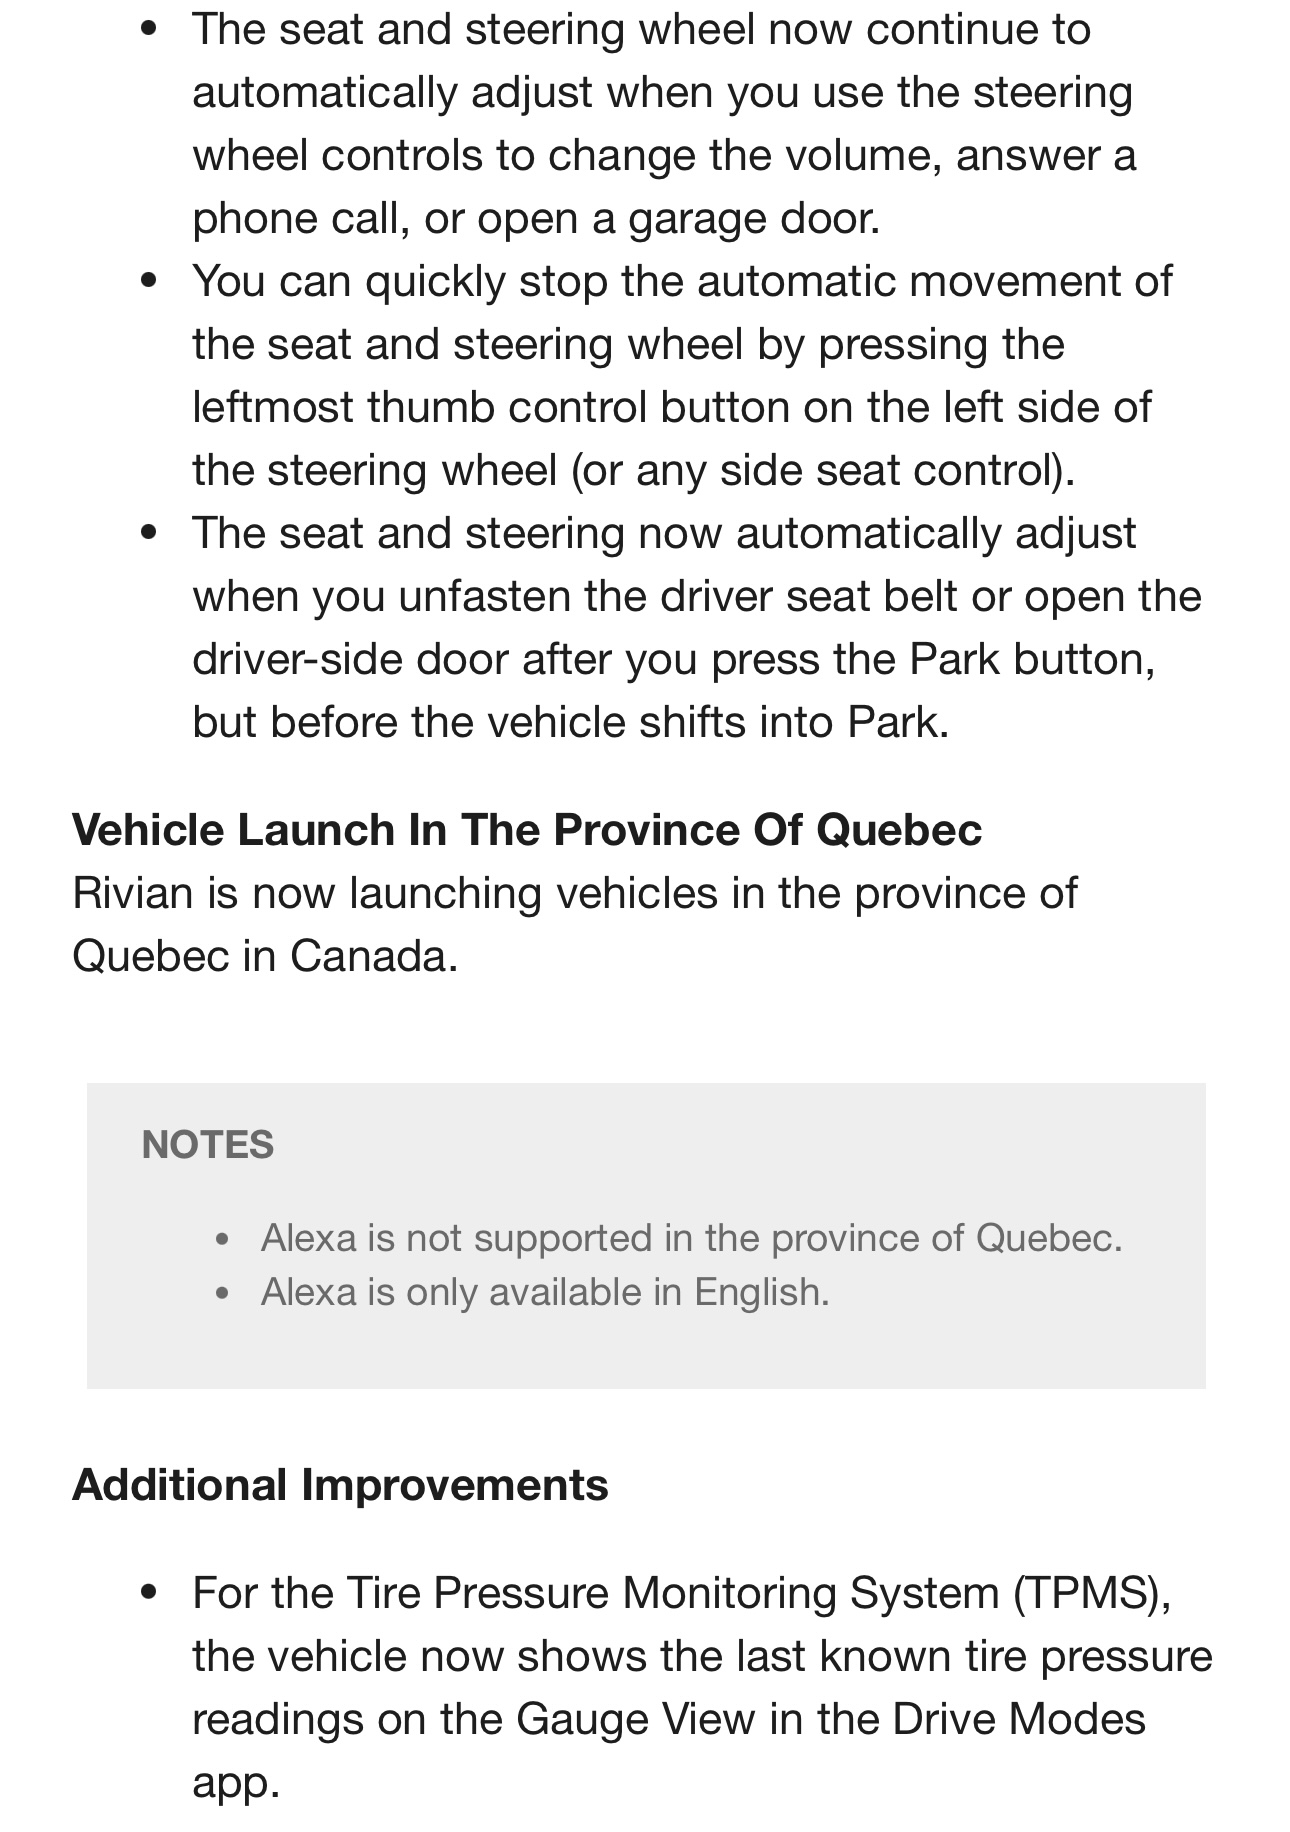 Rivian R1T R1S Montreal service center location is confirmed! IMG_3176